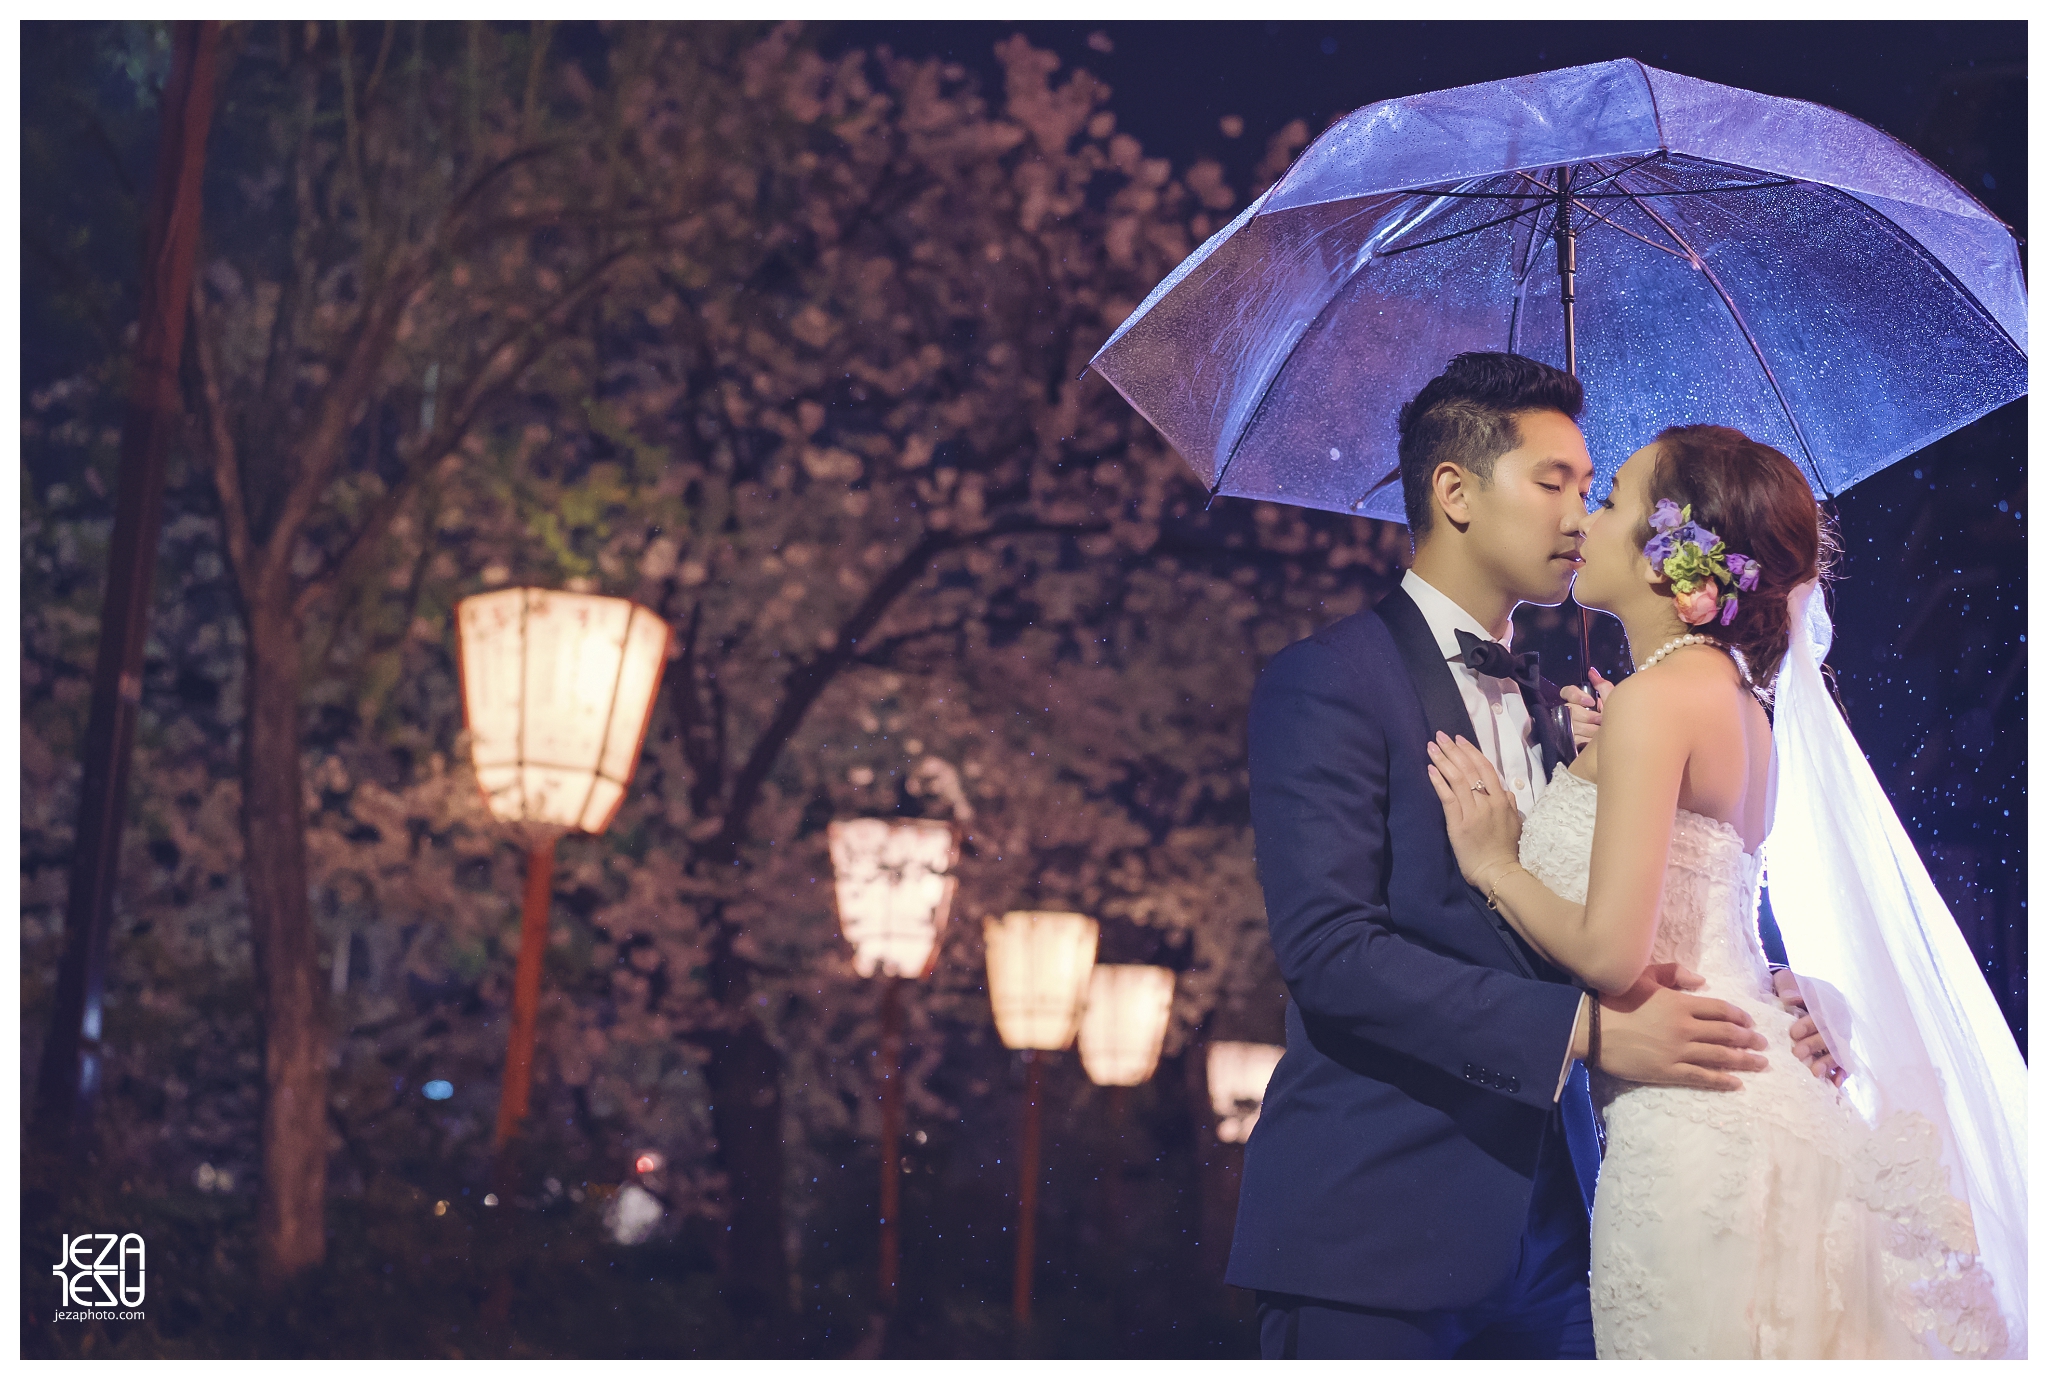 JD & Andrew's Japan Tokyo Kyoto Pre Wedding Engagement photography session